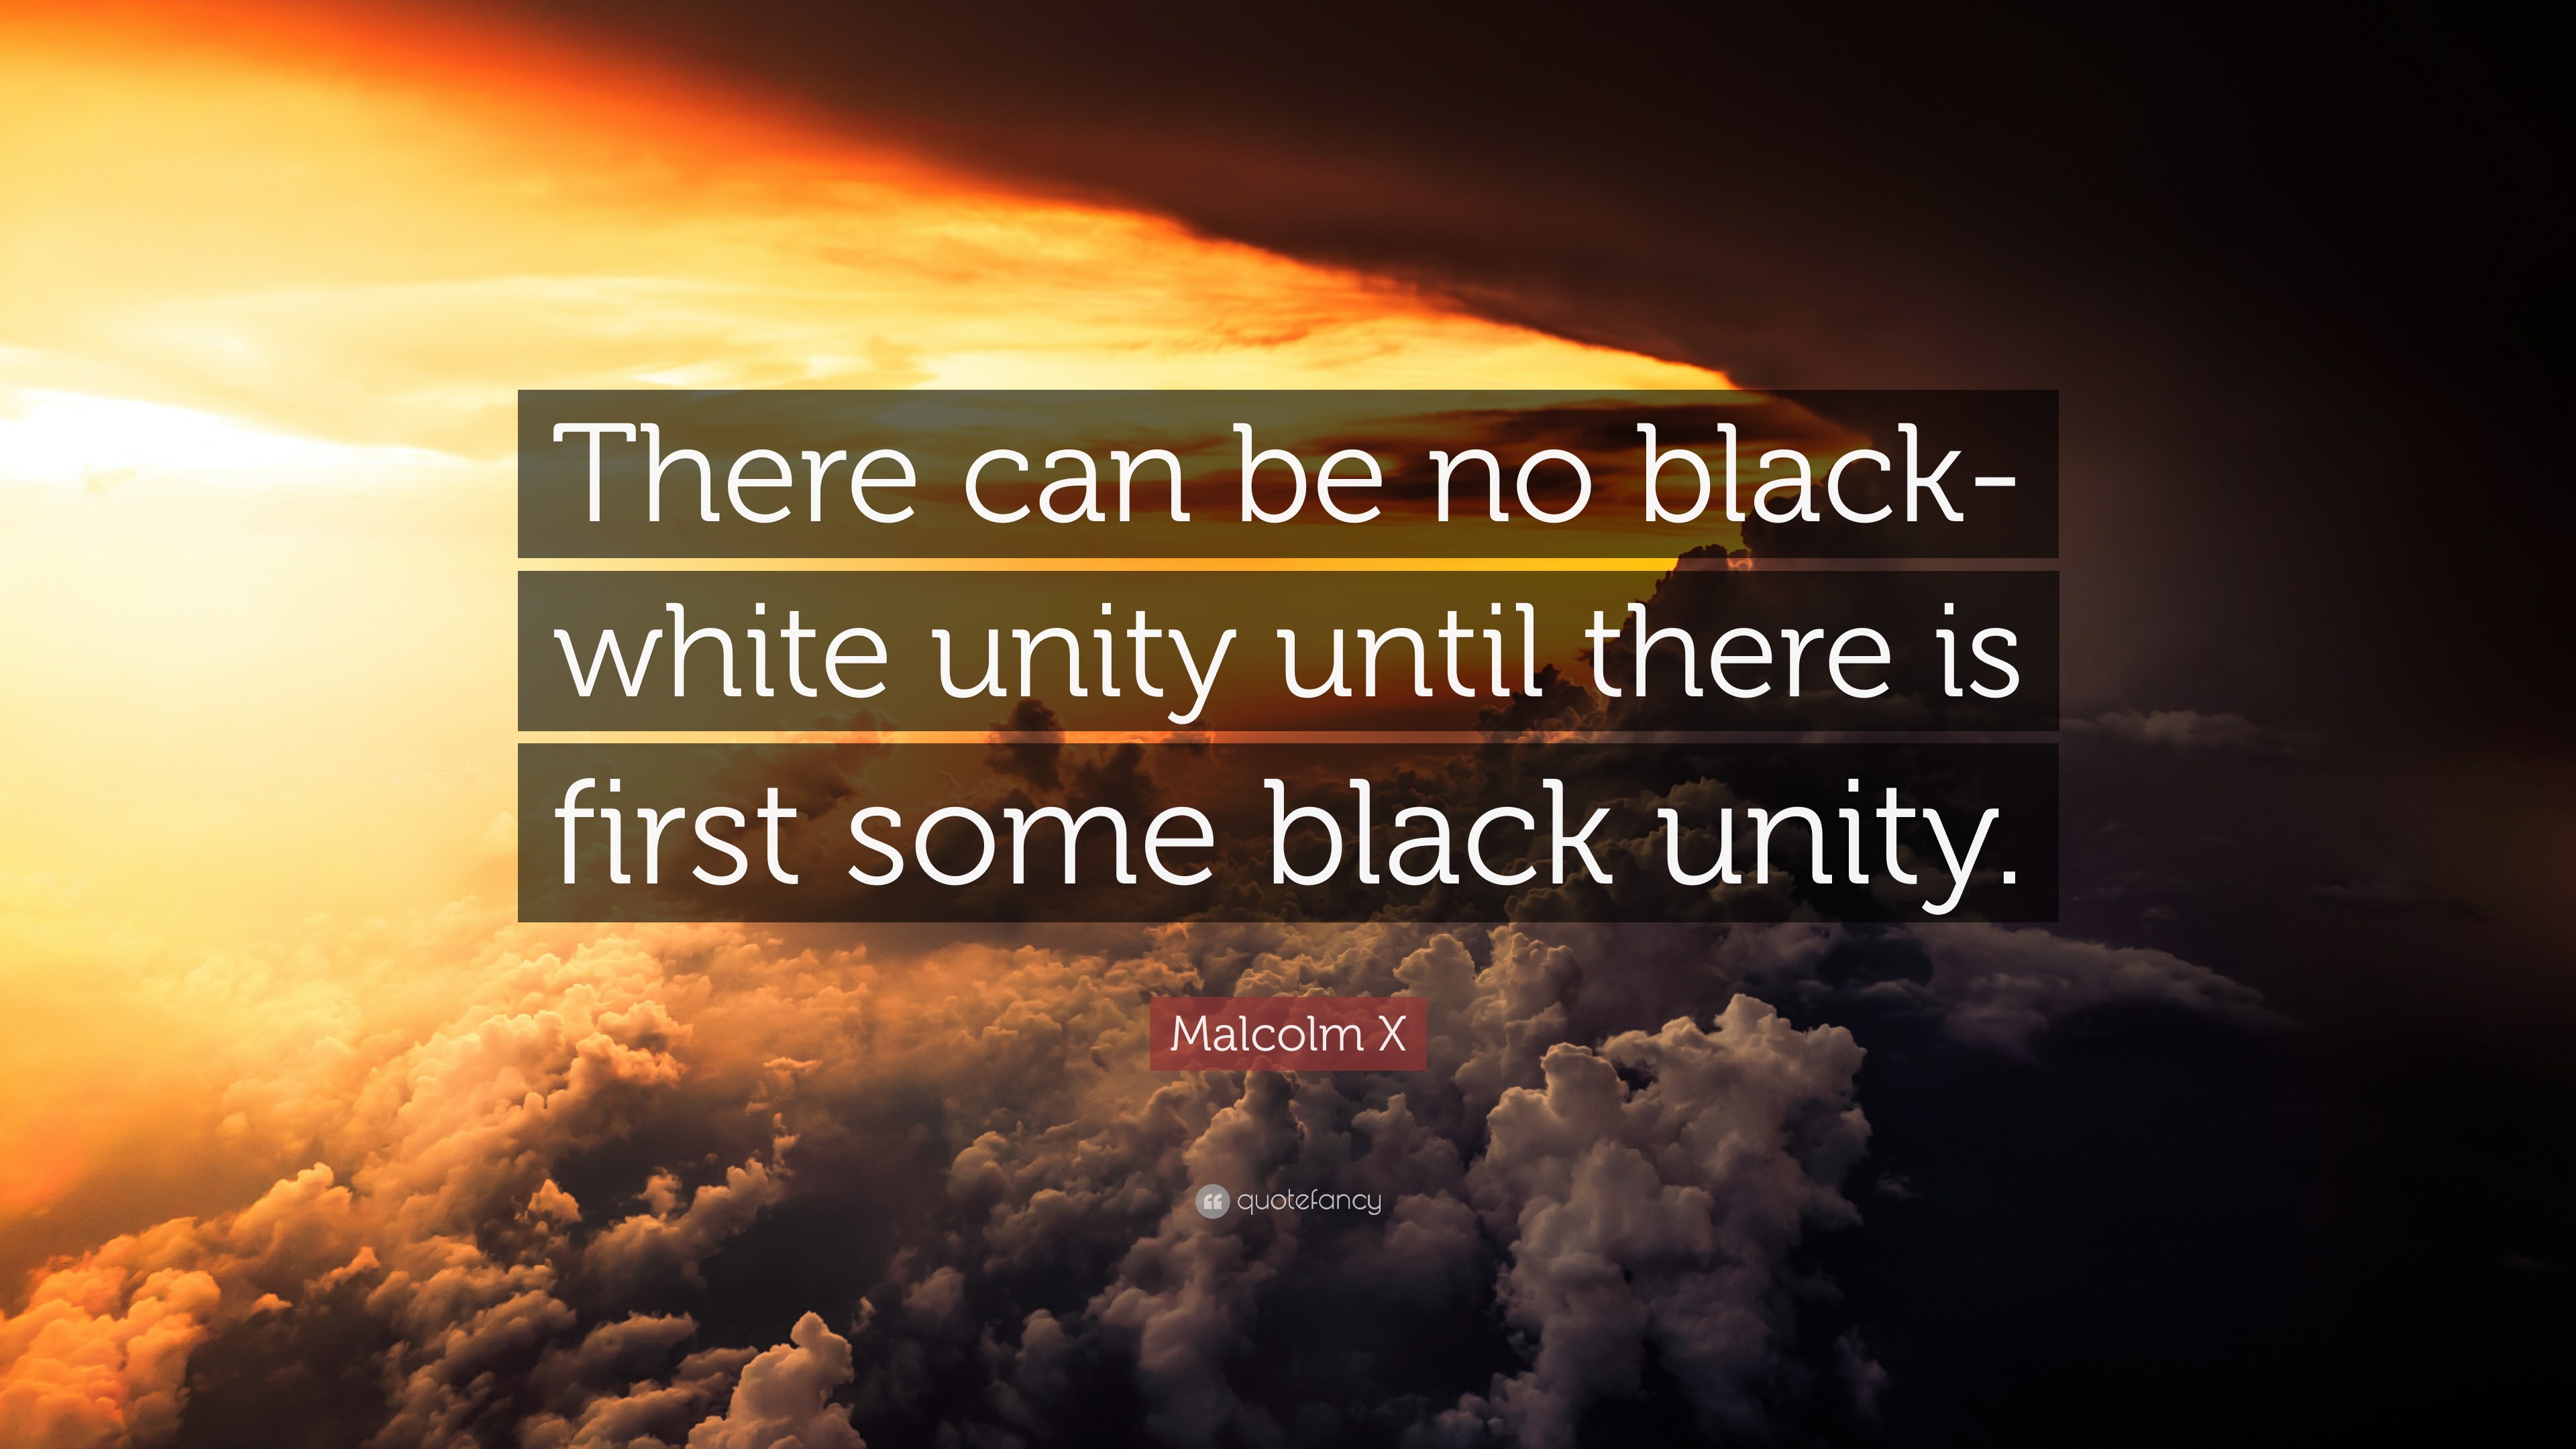 Malcolm X Quote: “There can be no black-white unity until there is